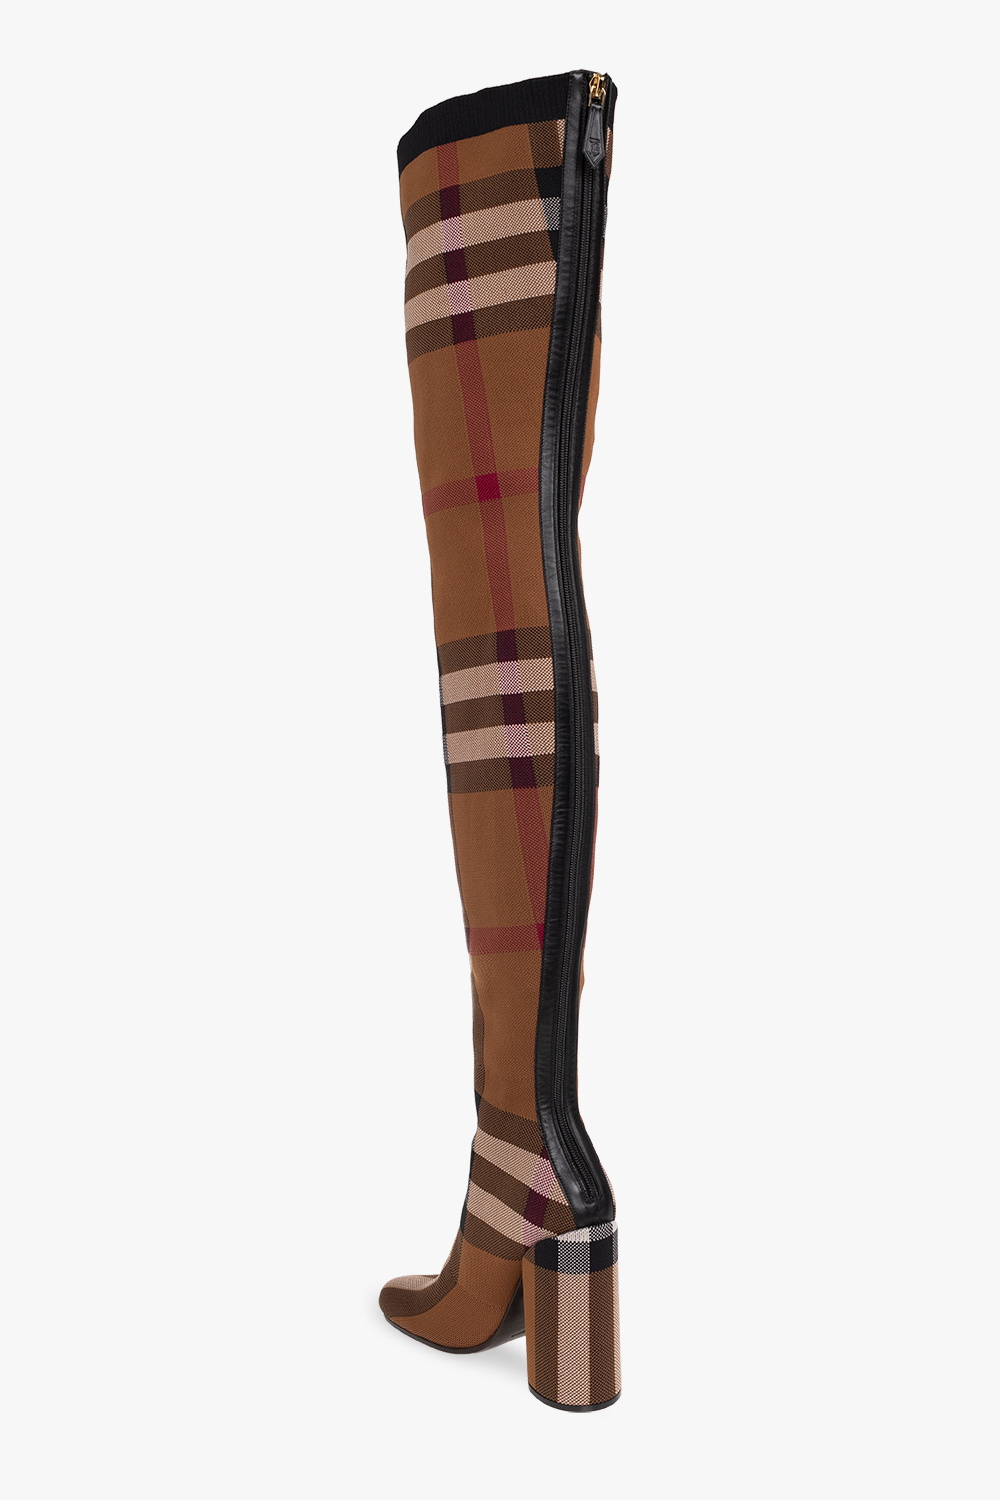 Burberry ‘Anita’ heeled over-the-knee boots